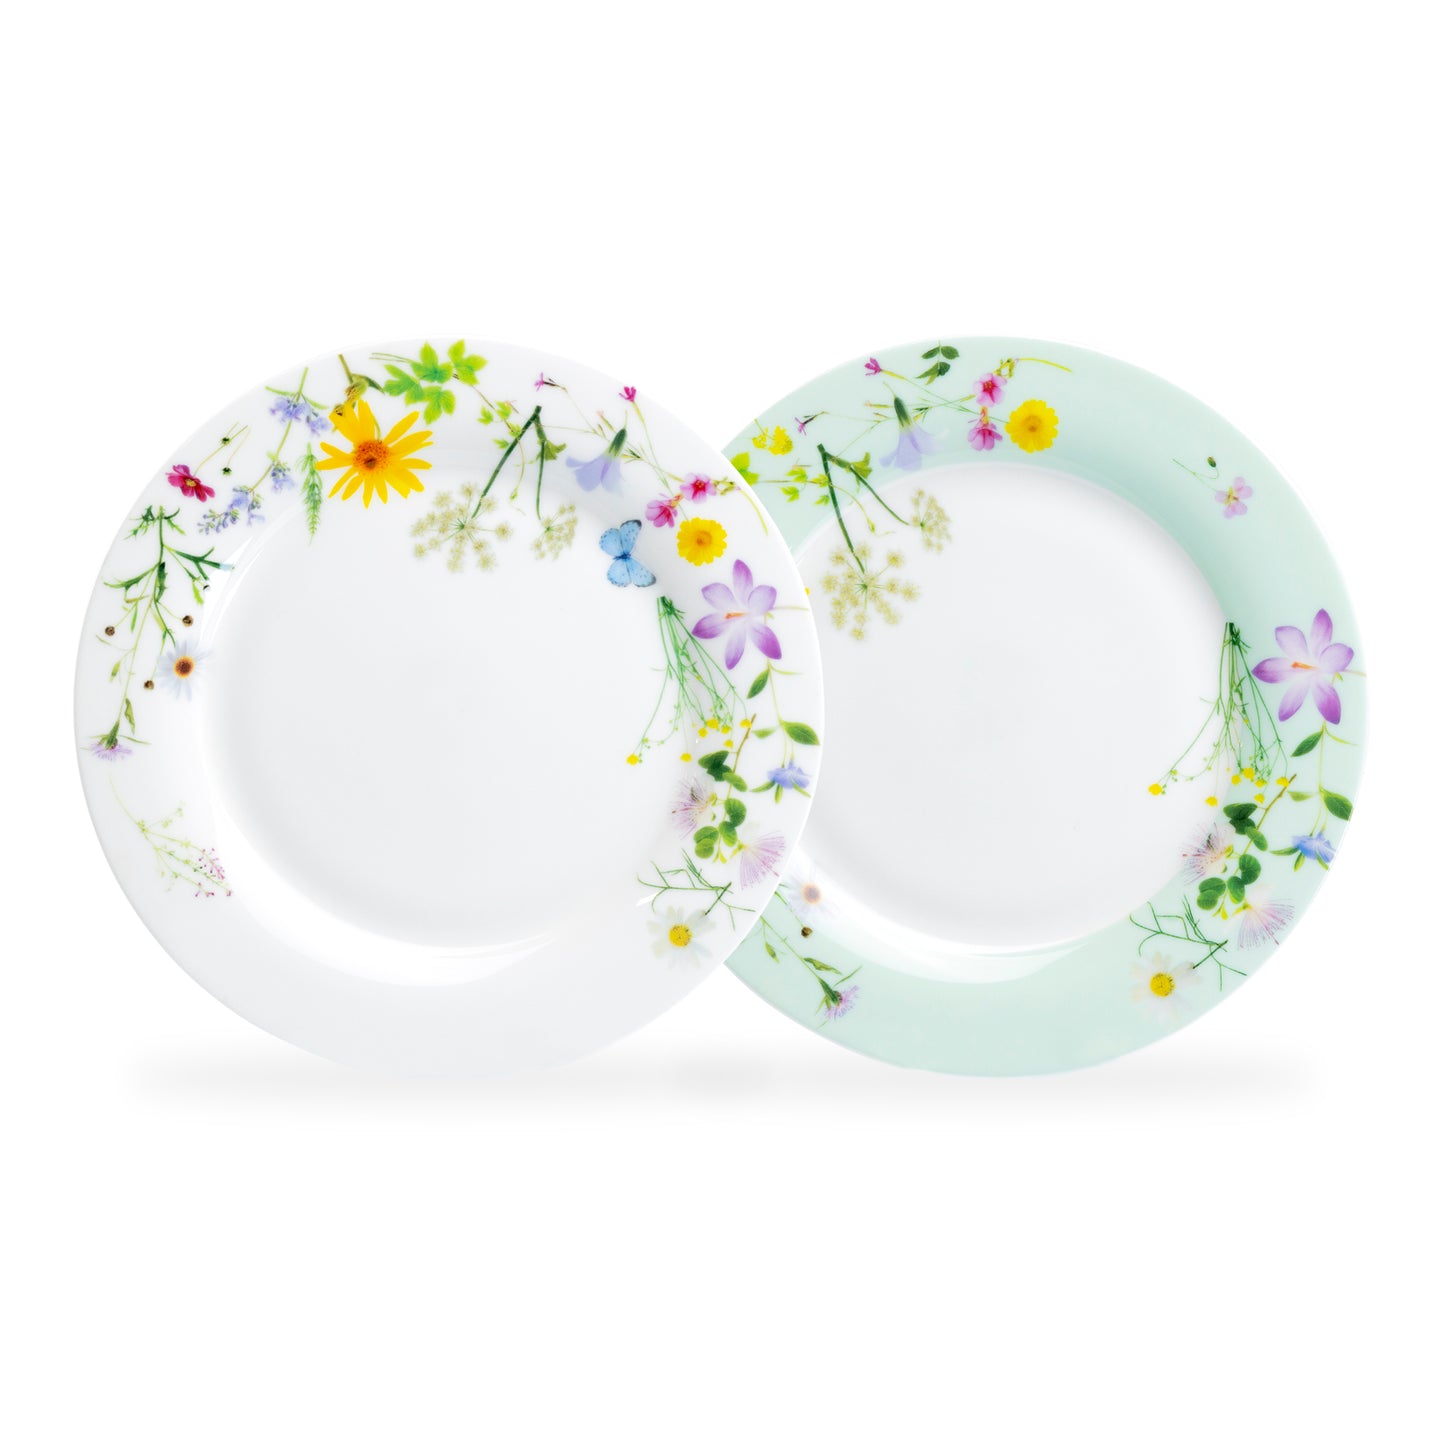 Summer Meadow Mint Bone China Cup and Saucer